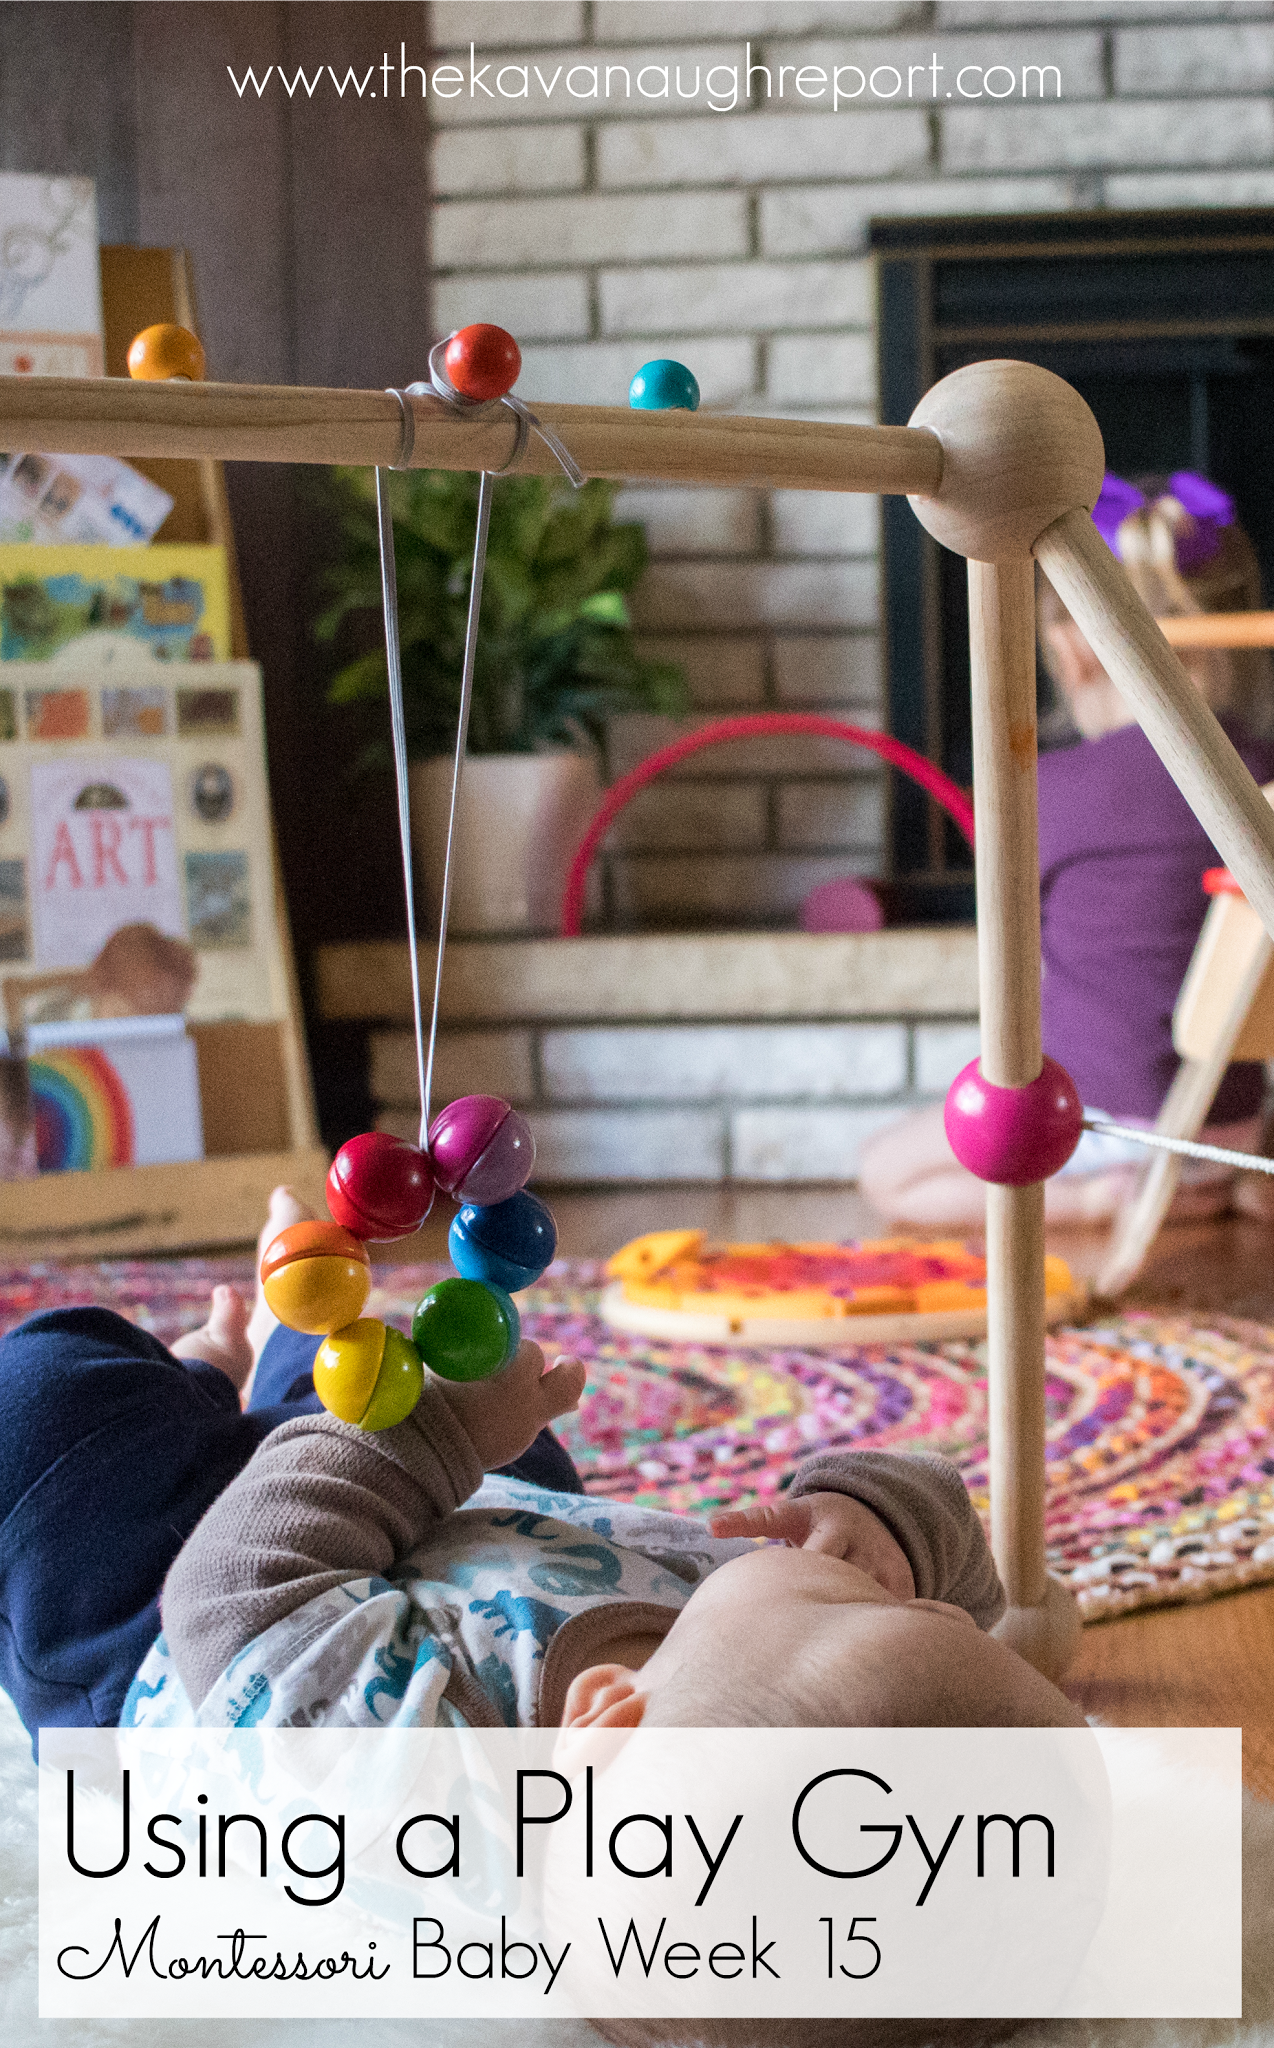 Using a baby play gym as an alternative to a movement area can be a perfect option for many Montessori babies. This allows families to stay together while still keeping the baby engaged in a Montessori mobile.